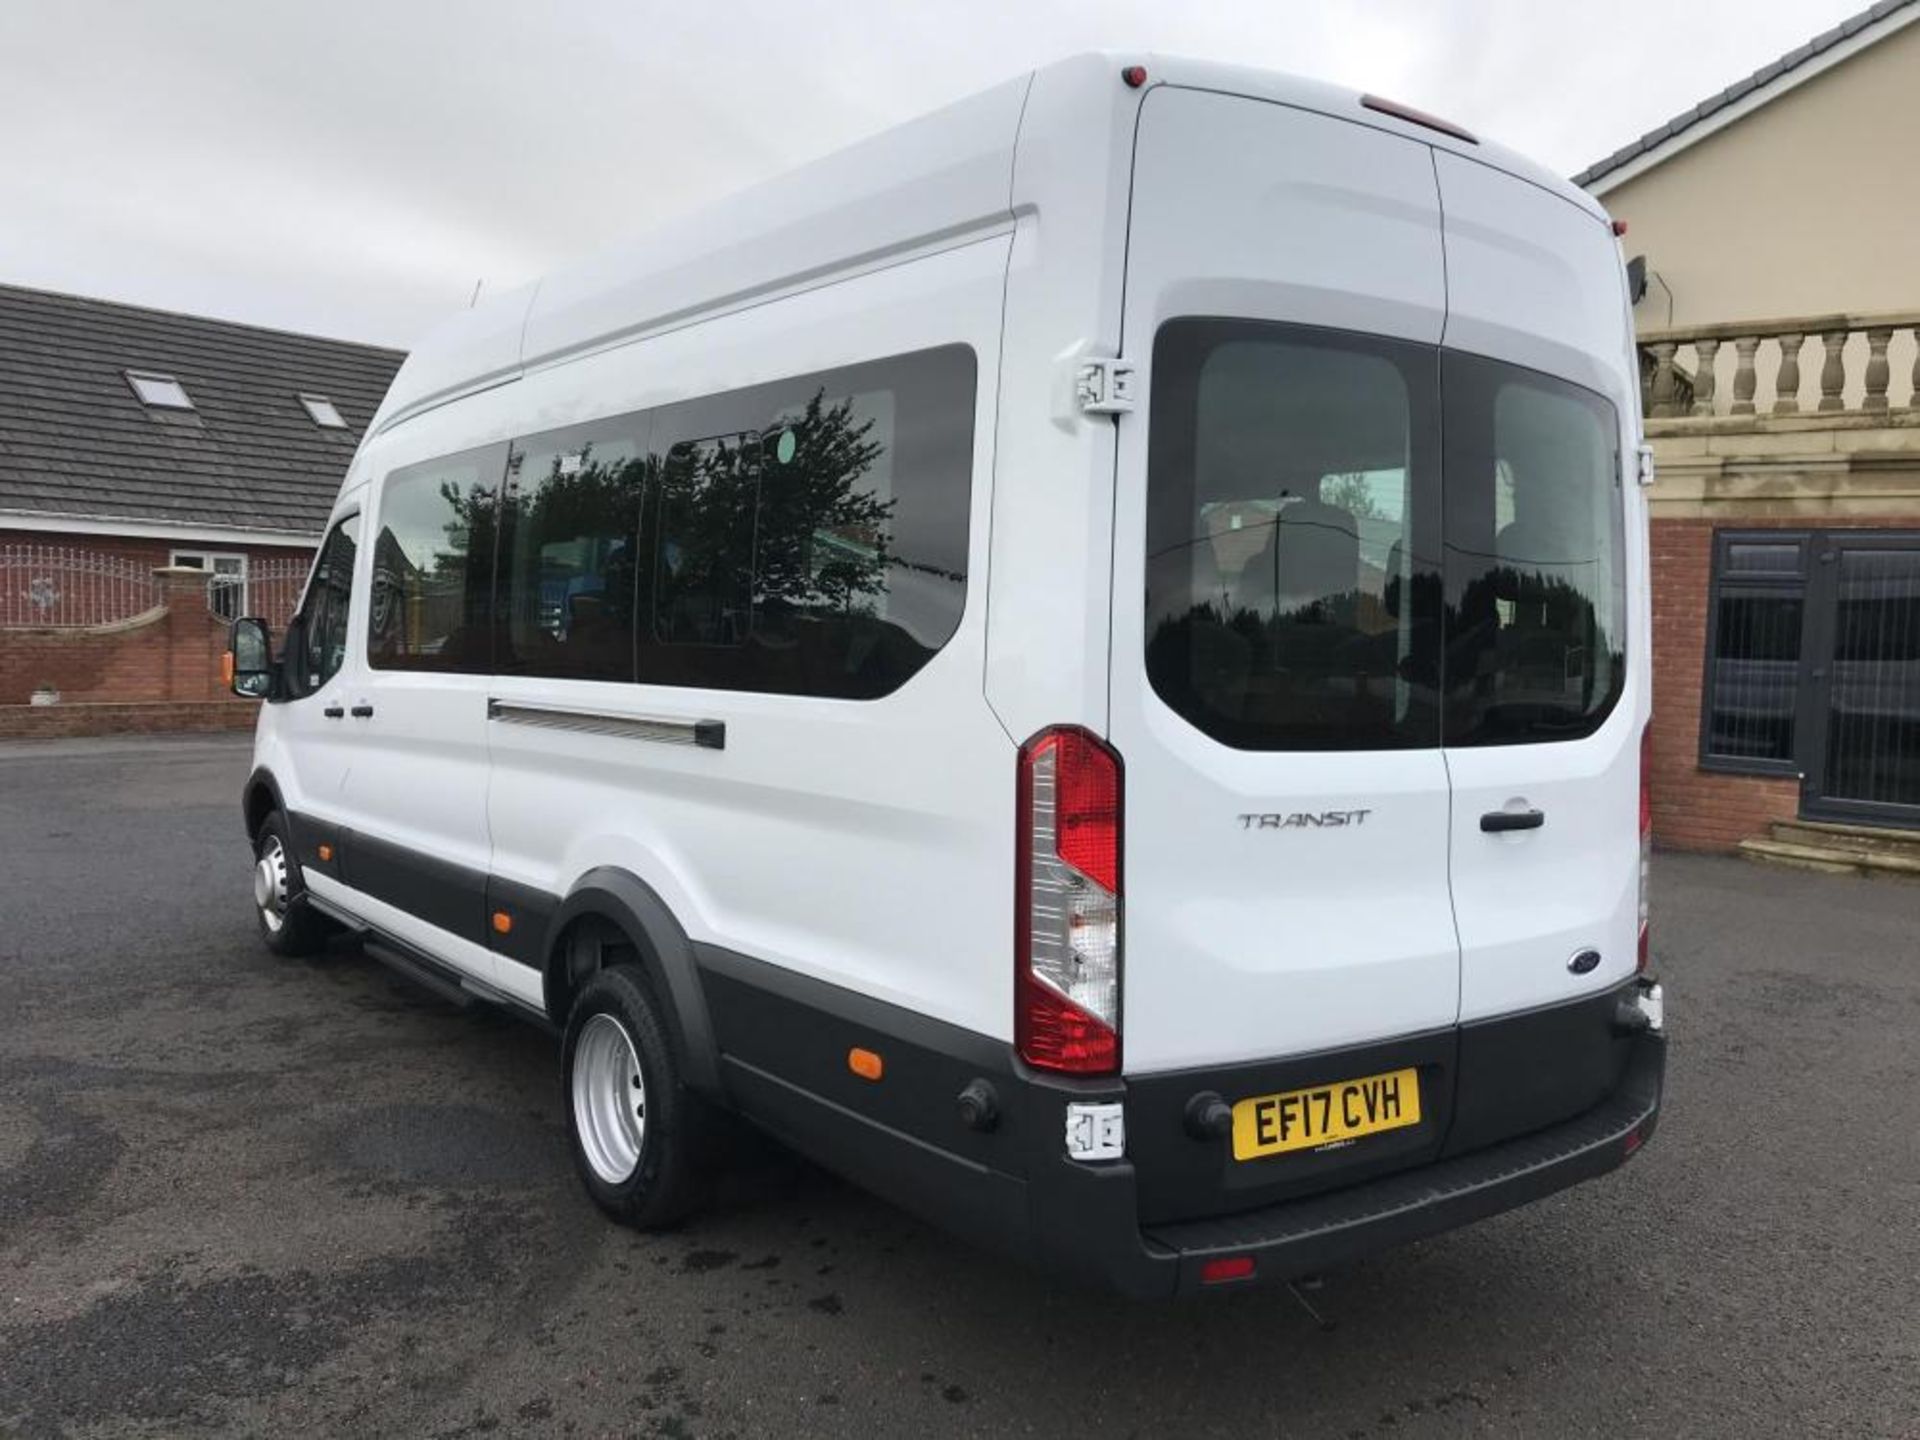 2017/17 REG FORD TRANSIT 460 ECONETIC TECH 2.2 DIESEL WHITE 17 SEAT MINIBUS, SHOWING 0 FORMER KEEPER - Image 3 of 17